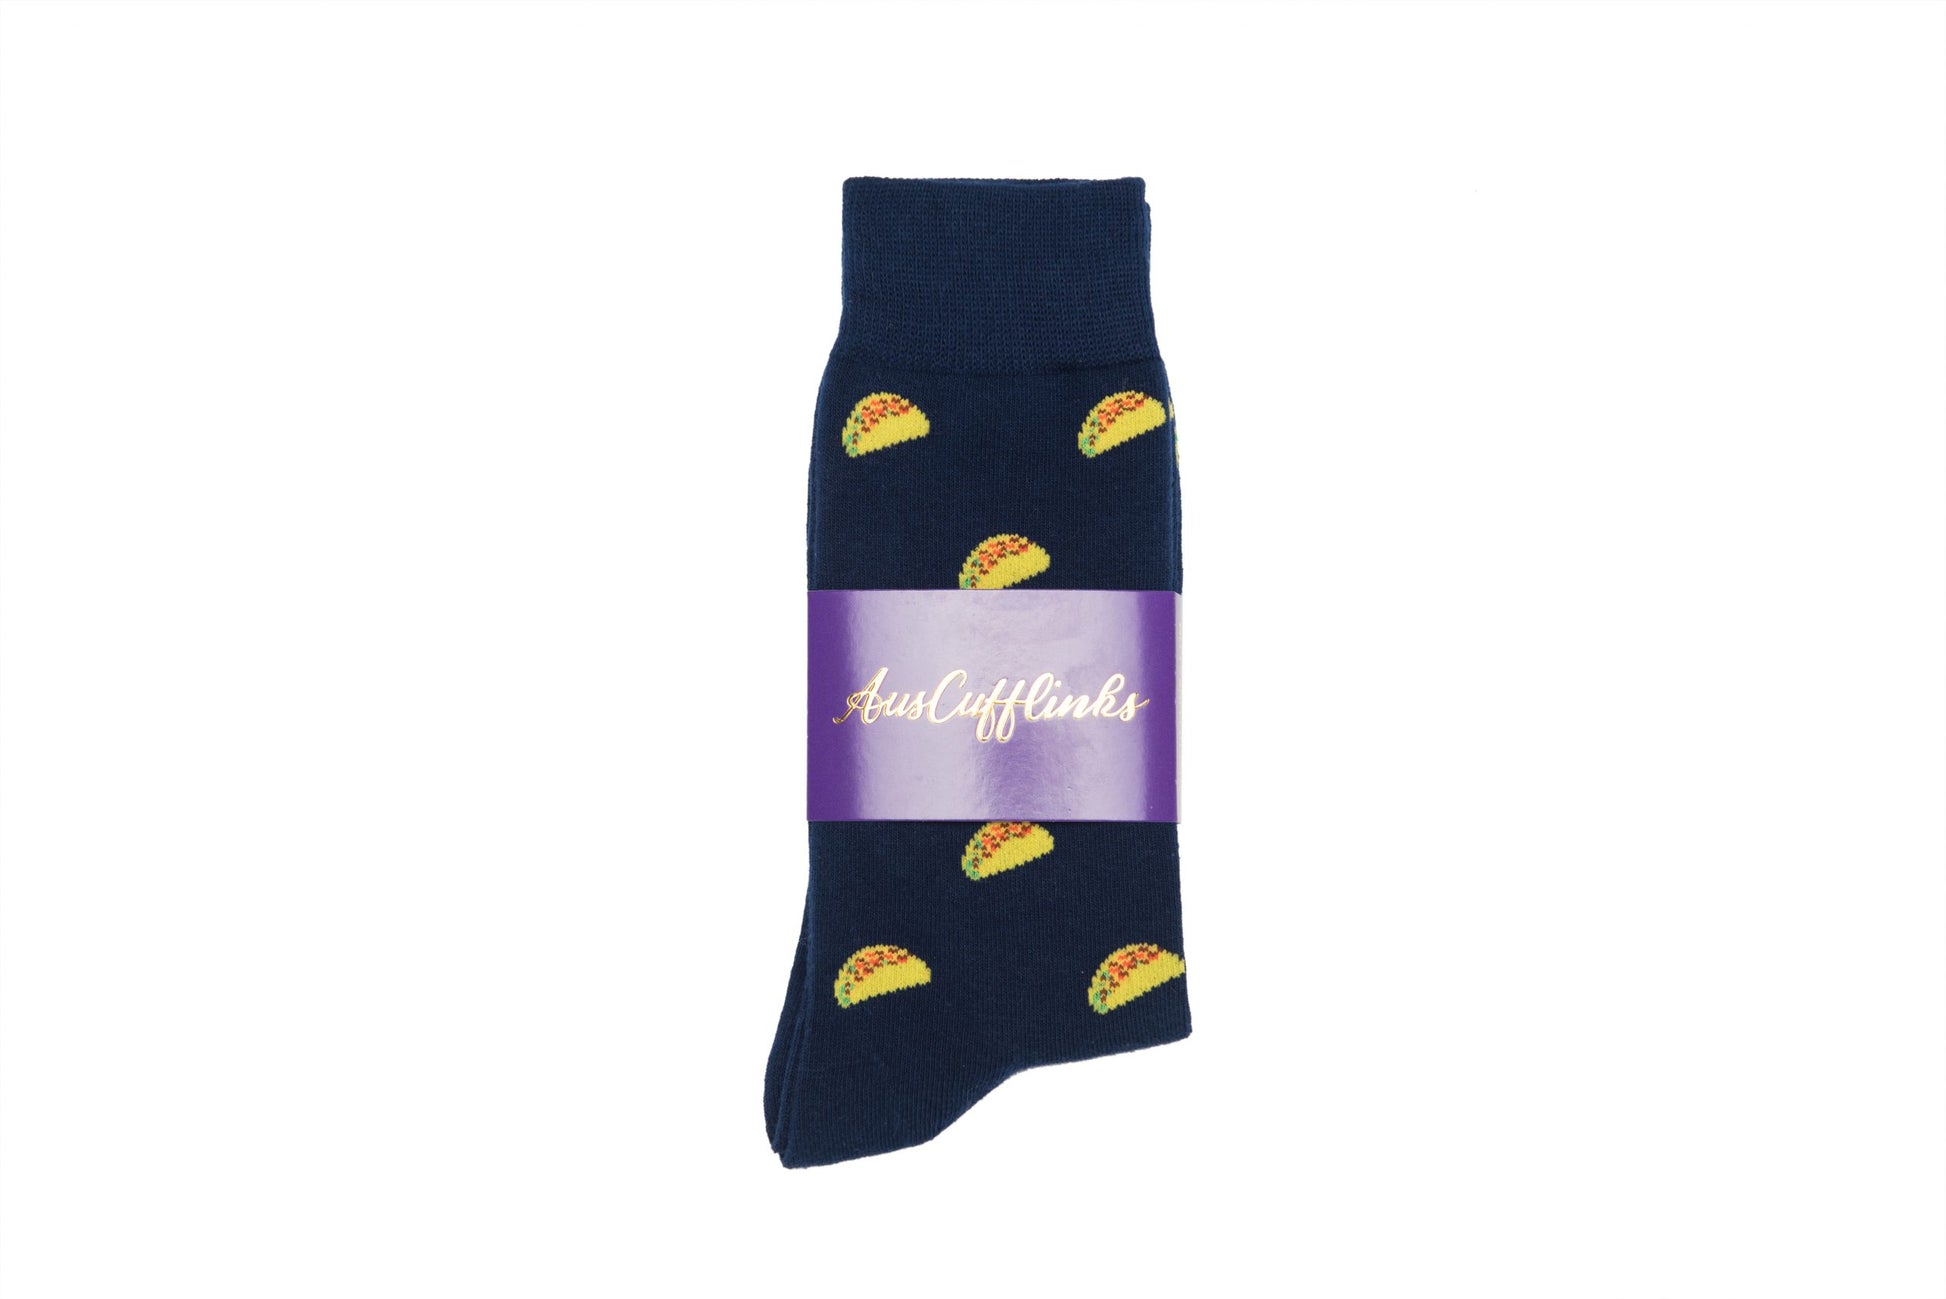 A single navy blue Taco Sock, embodying playfulness, and a purple label displaying "justcufflinks.